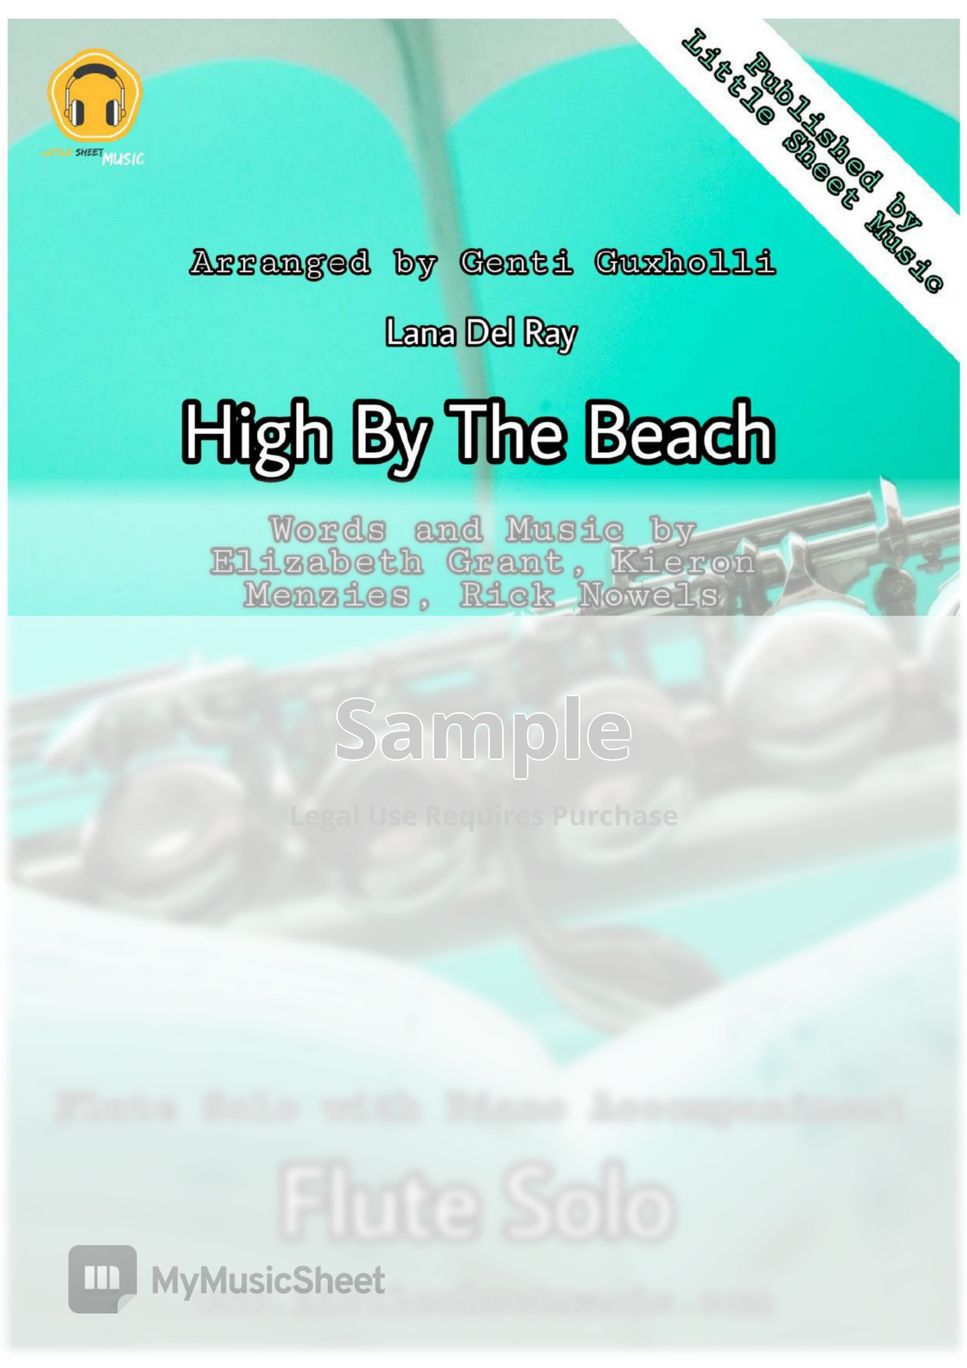 Lana Del Rey - High By The Beach (Flute Solo with Piano Accompaniment) by Genti Guxholli